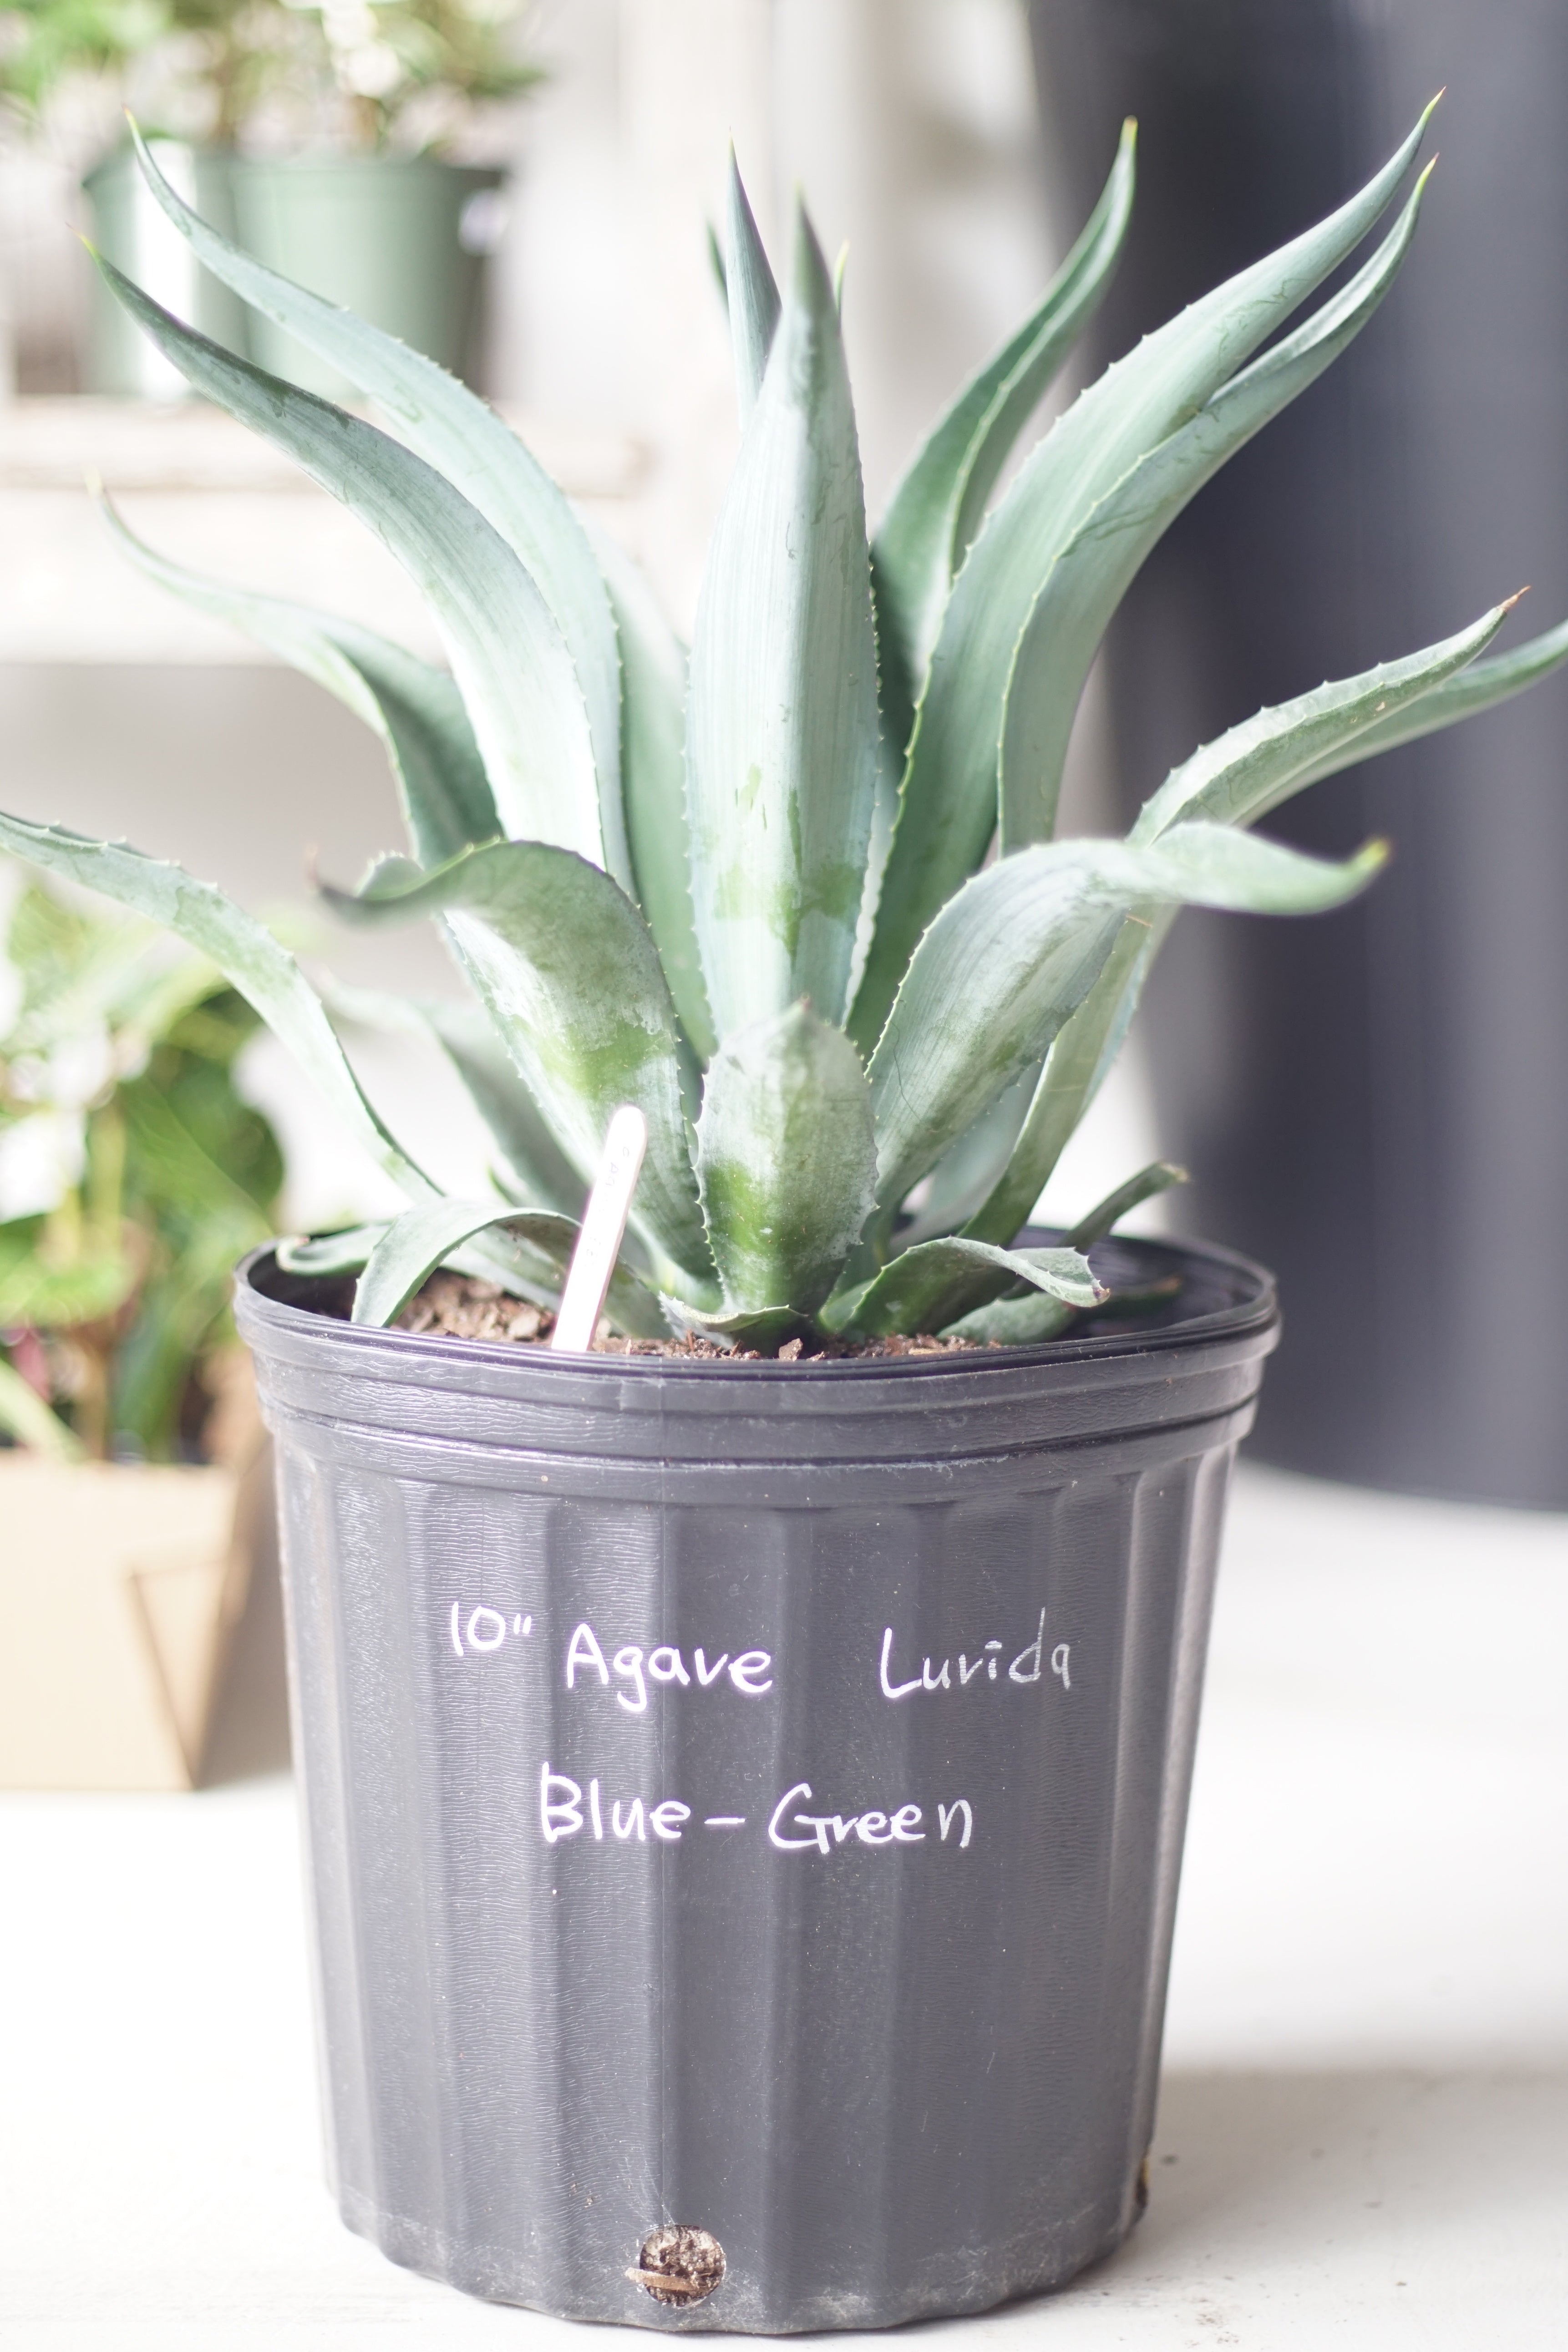 Copy of 10&quot; Agave Lurida Blue-Green